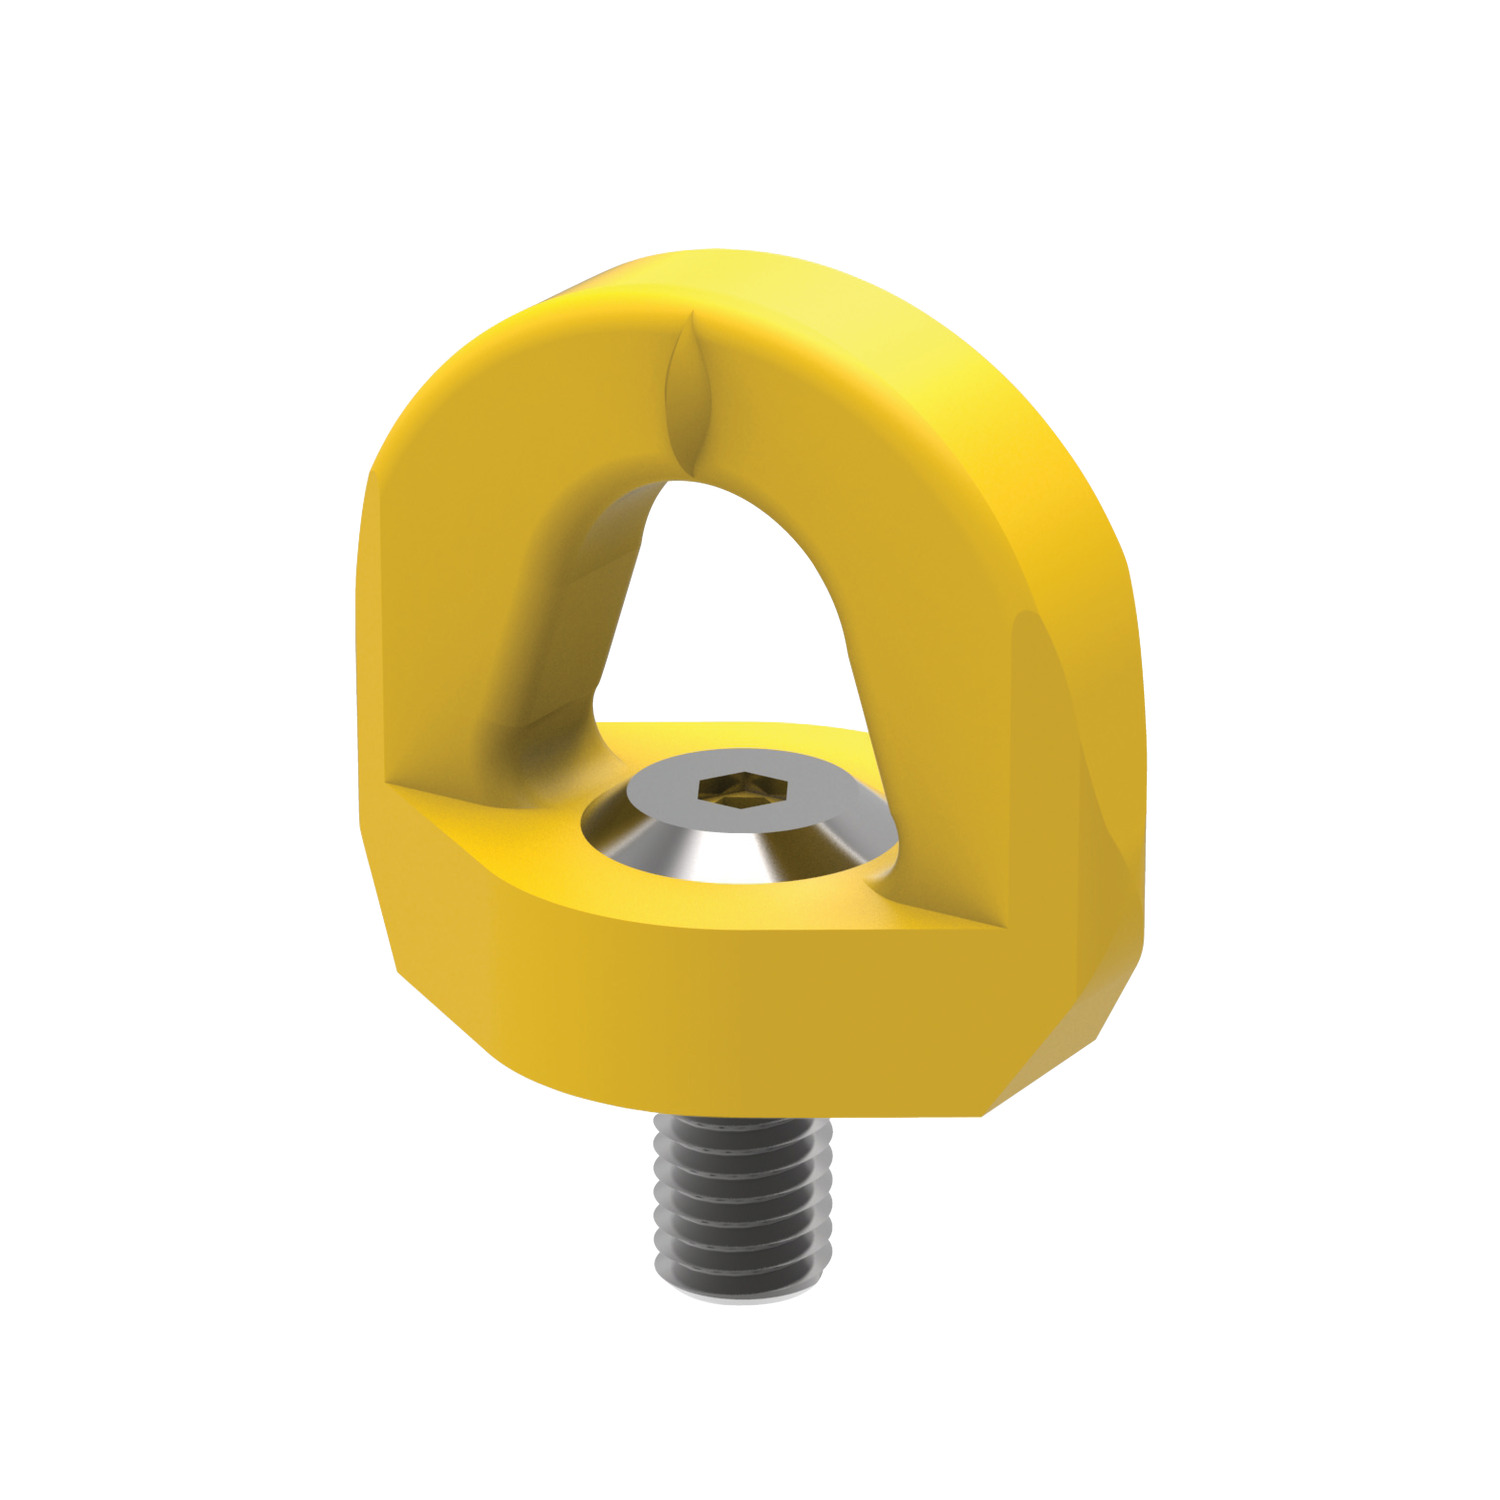 Fall Arrest Swivel Lifting High tensile corrosion resistant steel. Coloured yellow to indicate personal safety. Supplied with CE certificate.